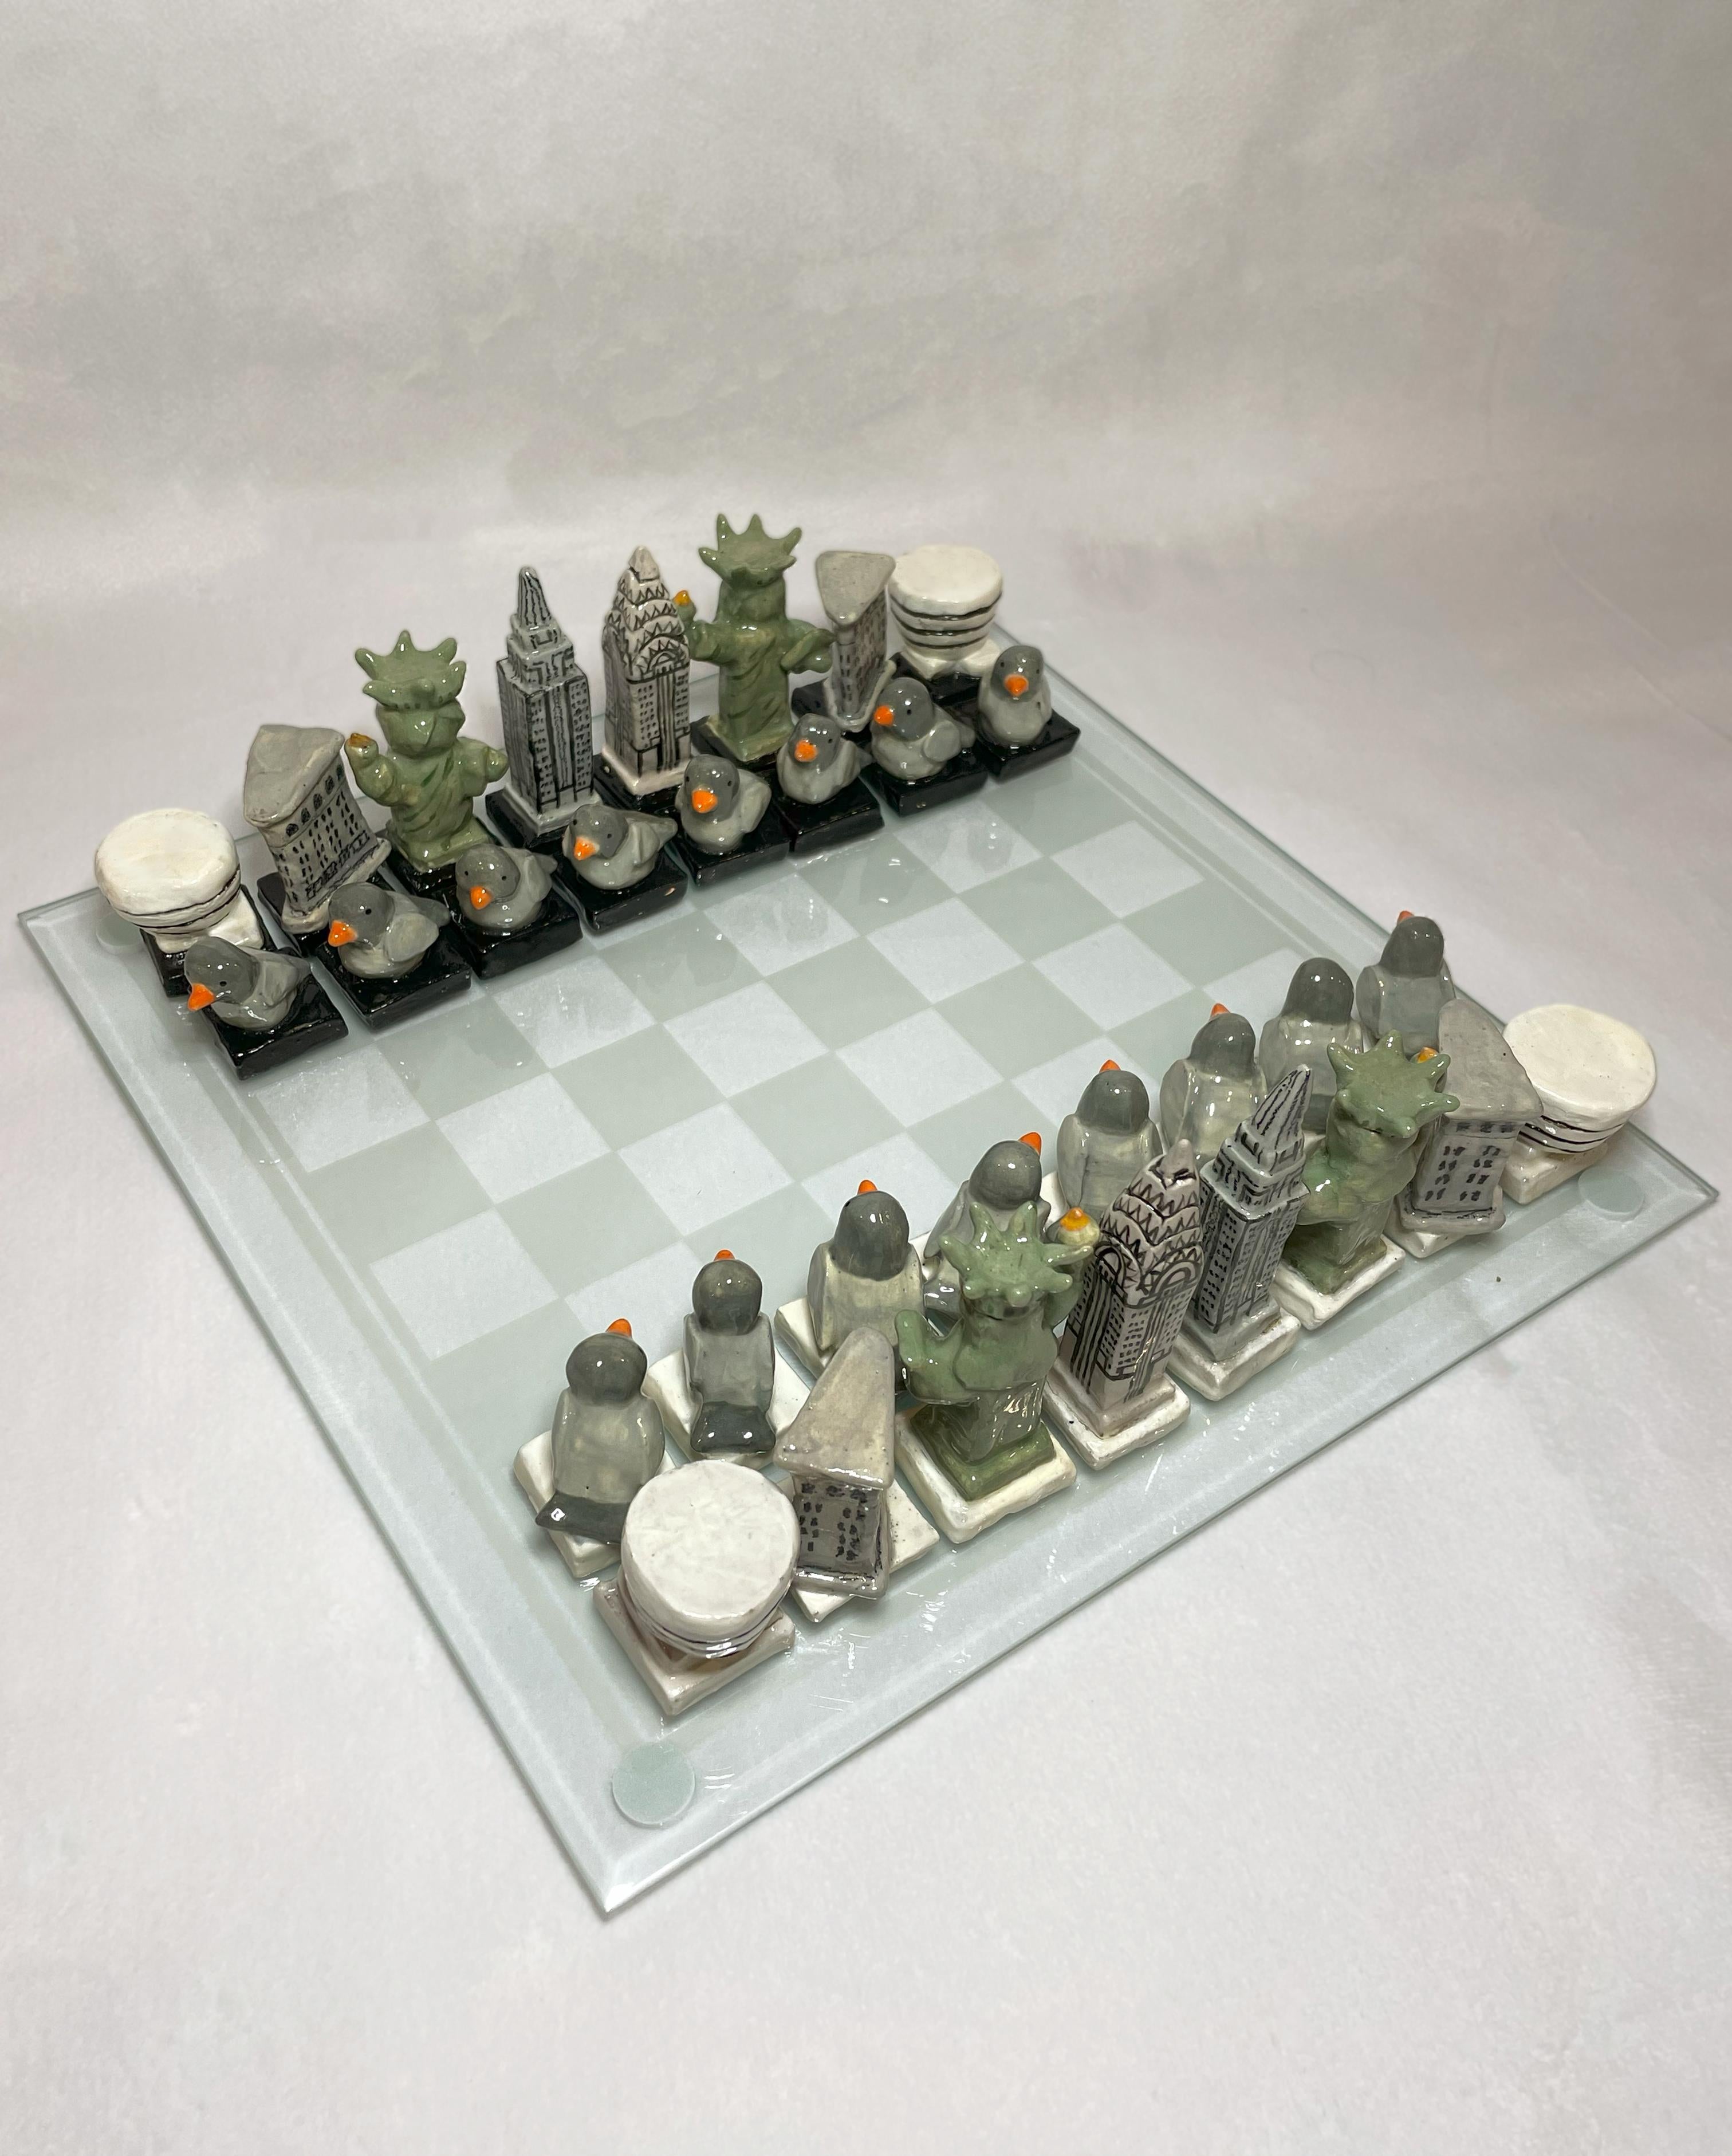 Ceramic NYC Themed Handcrafted Chess Set